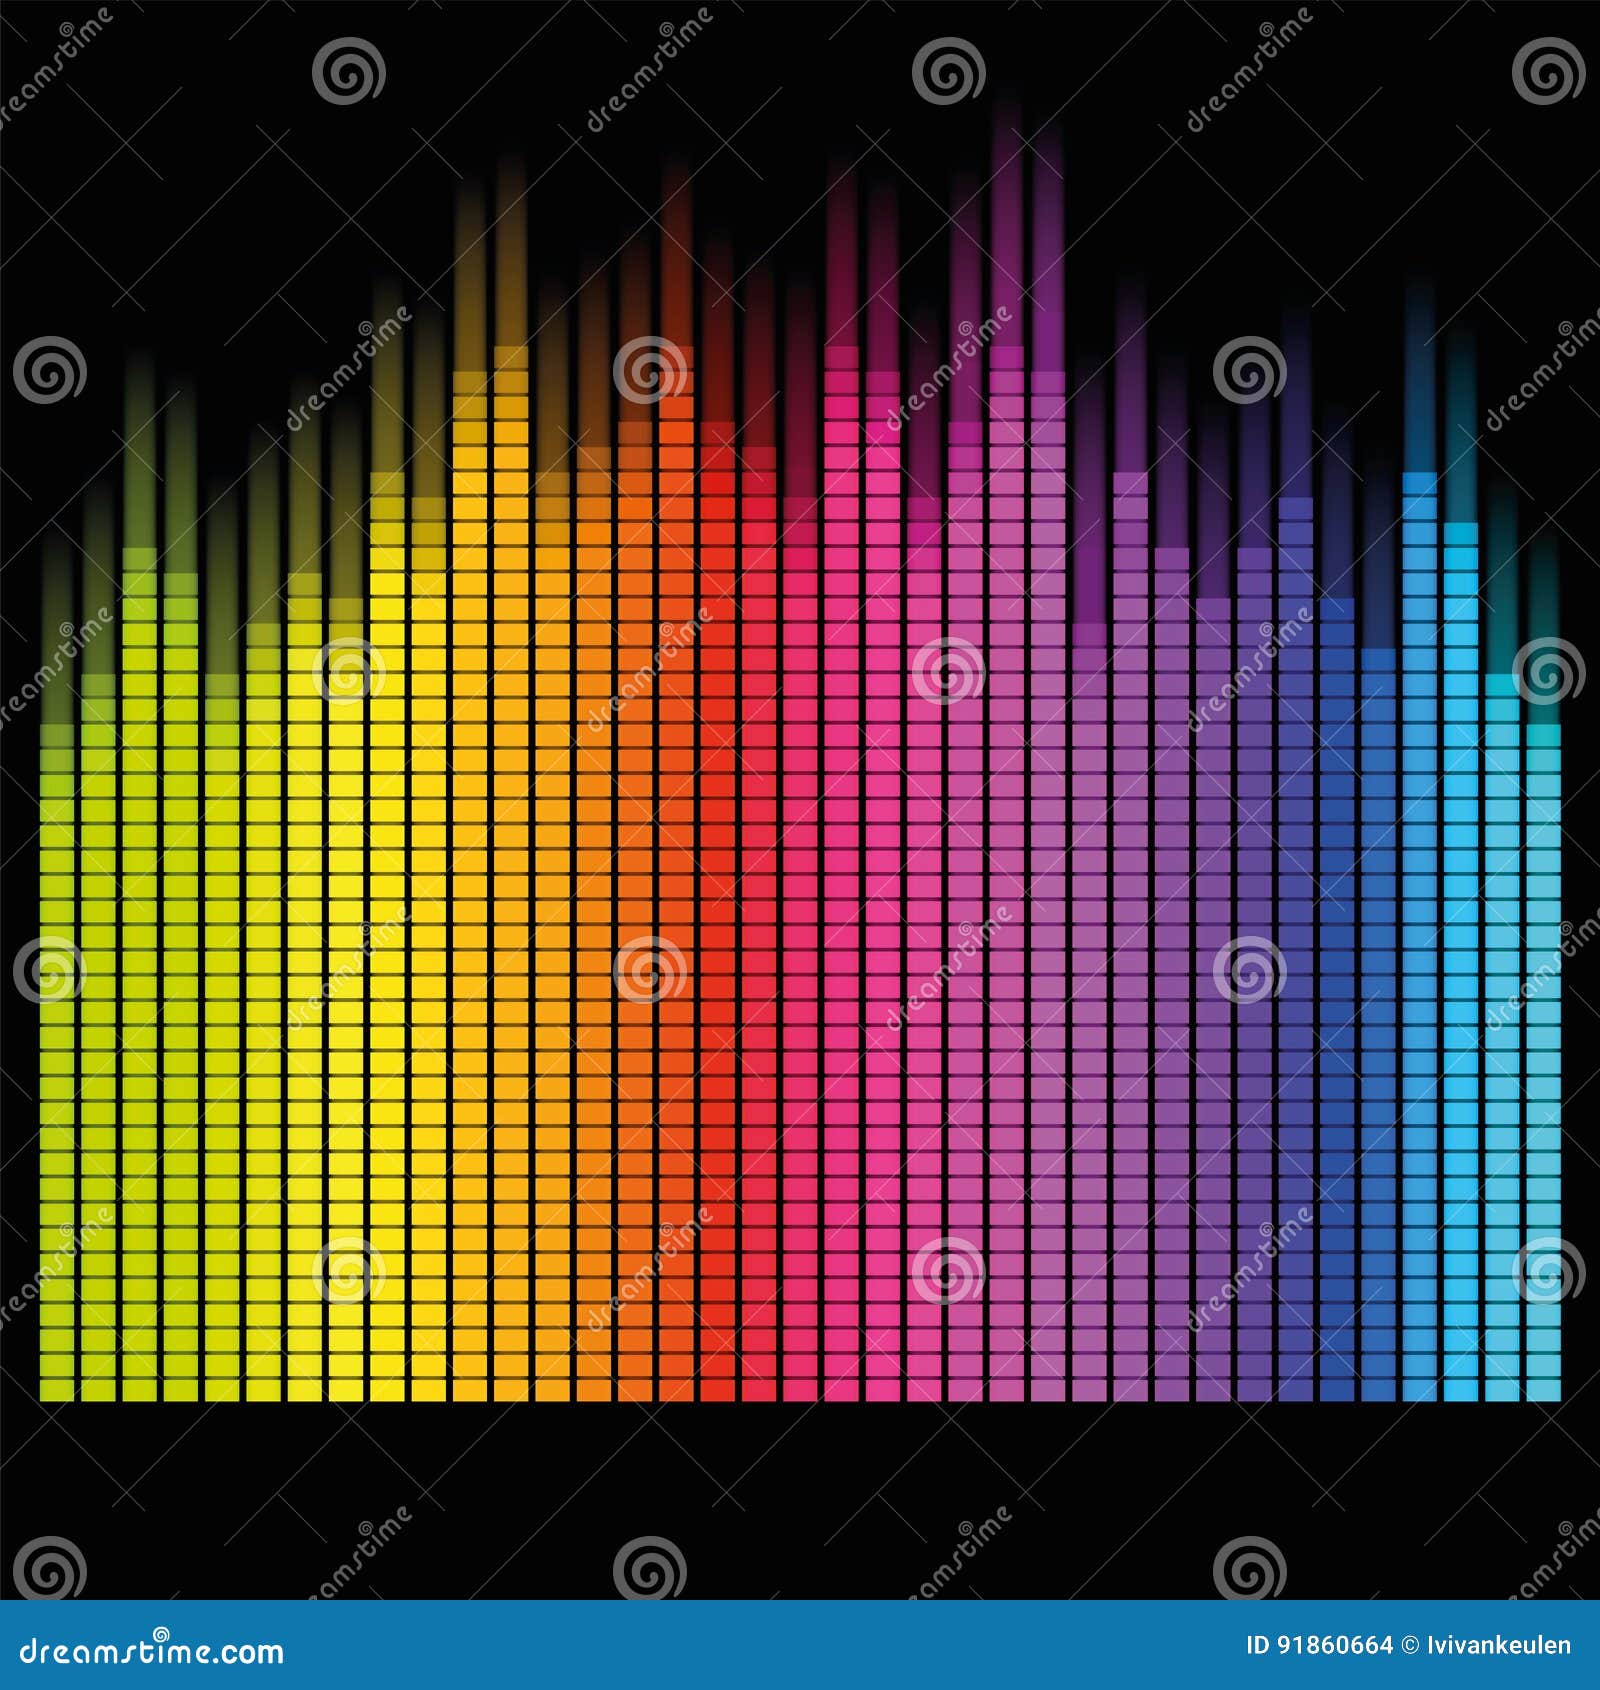 Equalizer vector design stock vector. Illustration of colored - 91860664